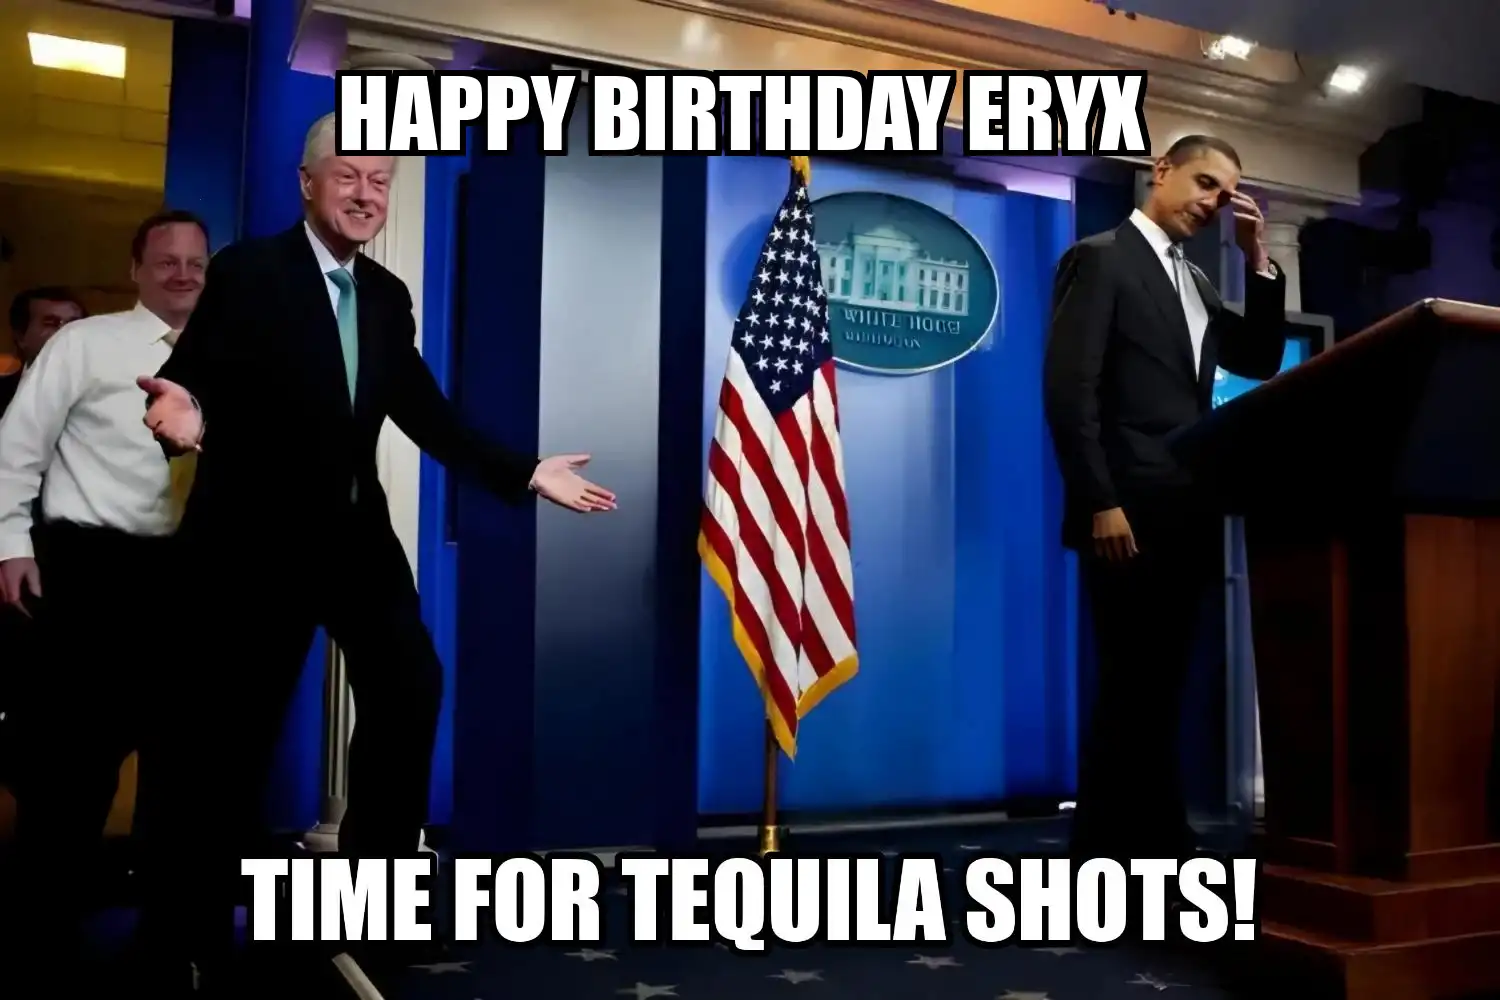 Happy Birthday Eryx Time For Tequila Shots Memes